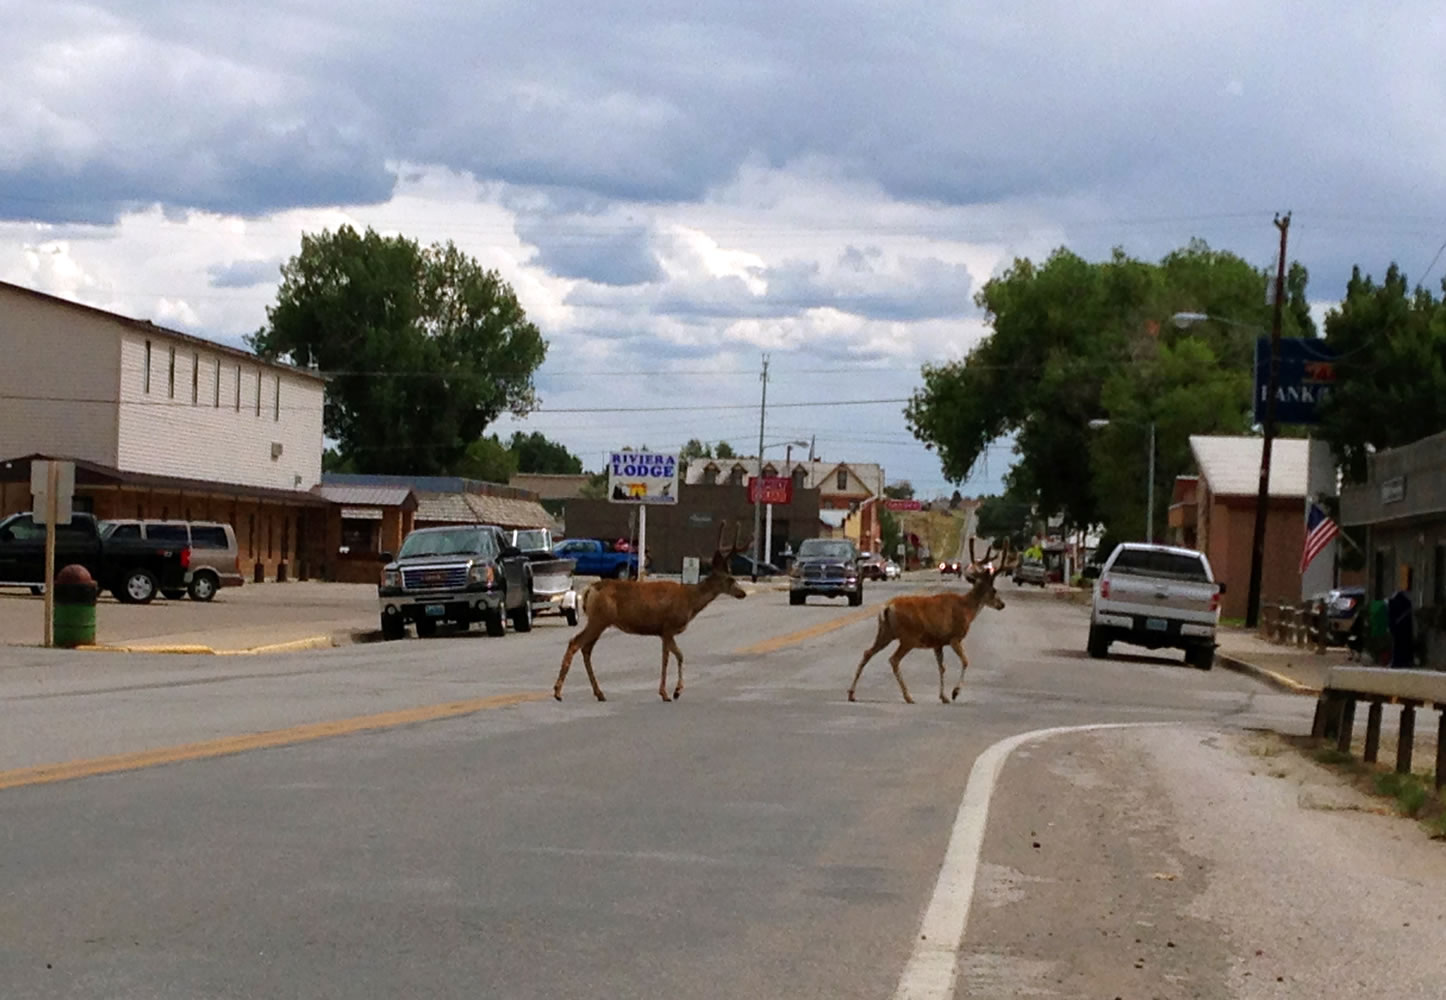 Deer cross the street Aug. 6 in downtown Saratoga, Wyo. Deer often browse on shrubbery and mangle chain-link fences as they leap from yard to yard.